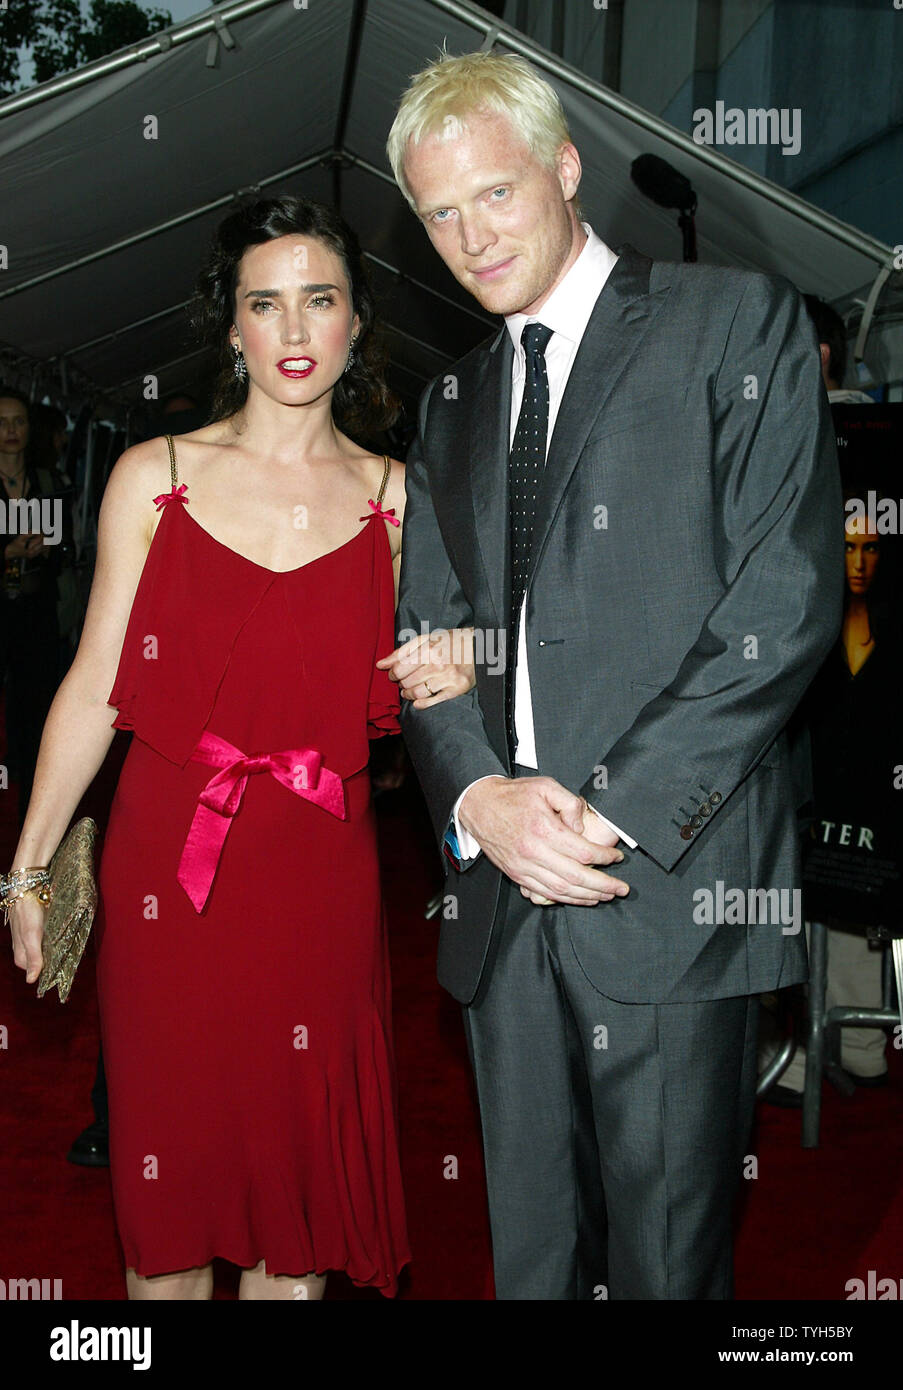 Jennifer Connelly poses for snap with husband Paul Bettany